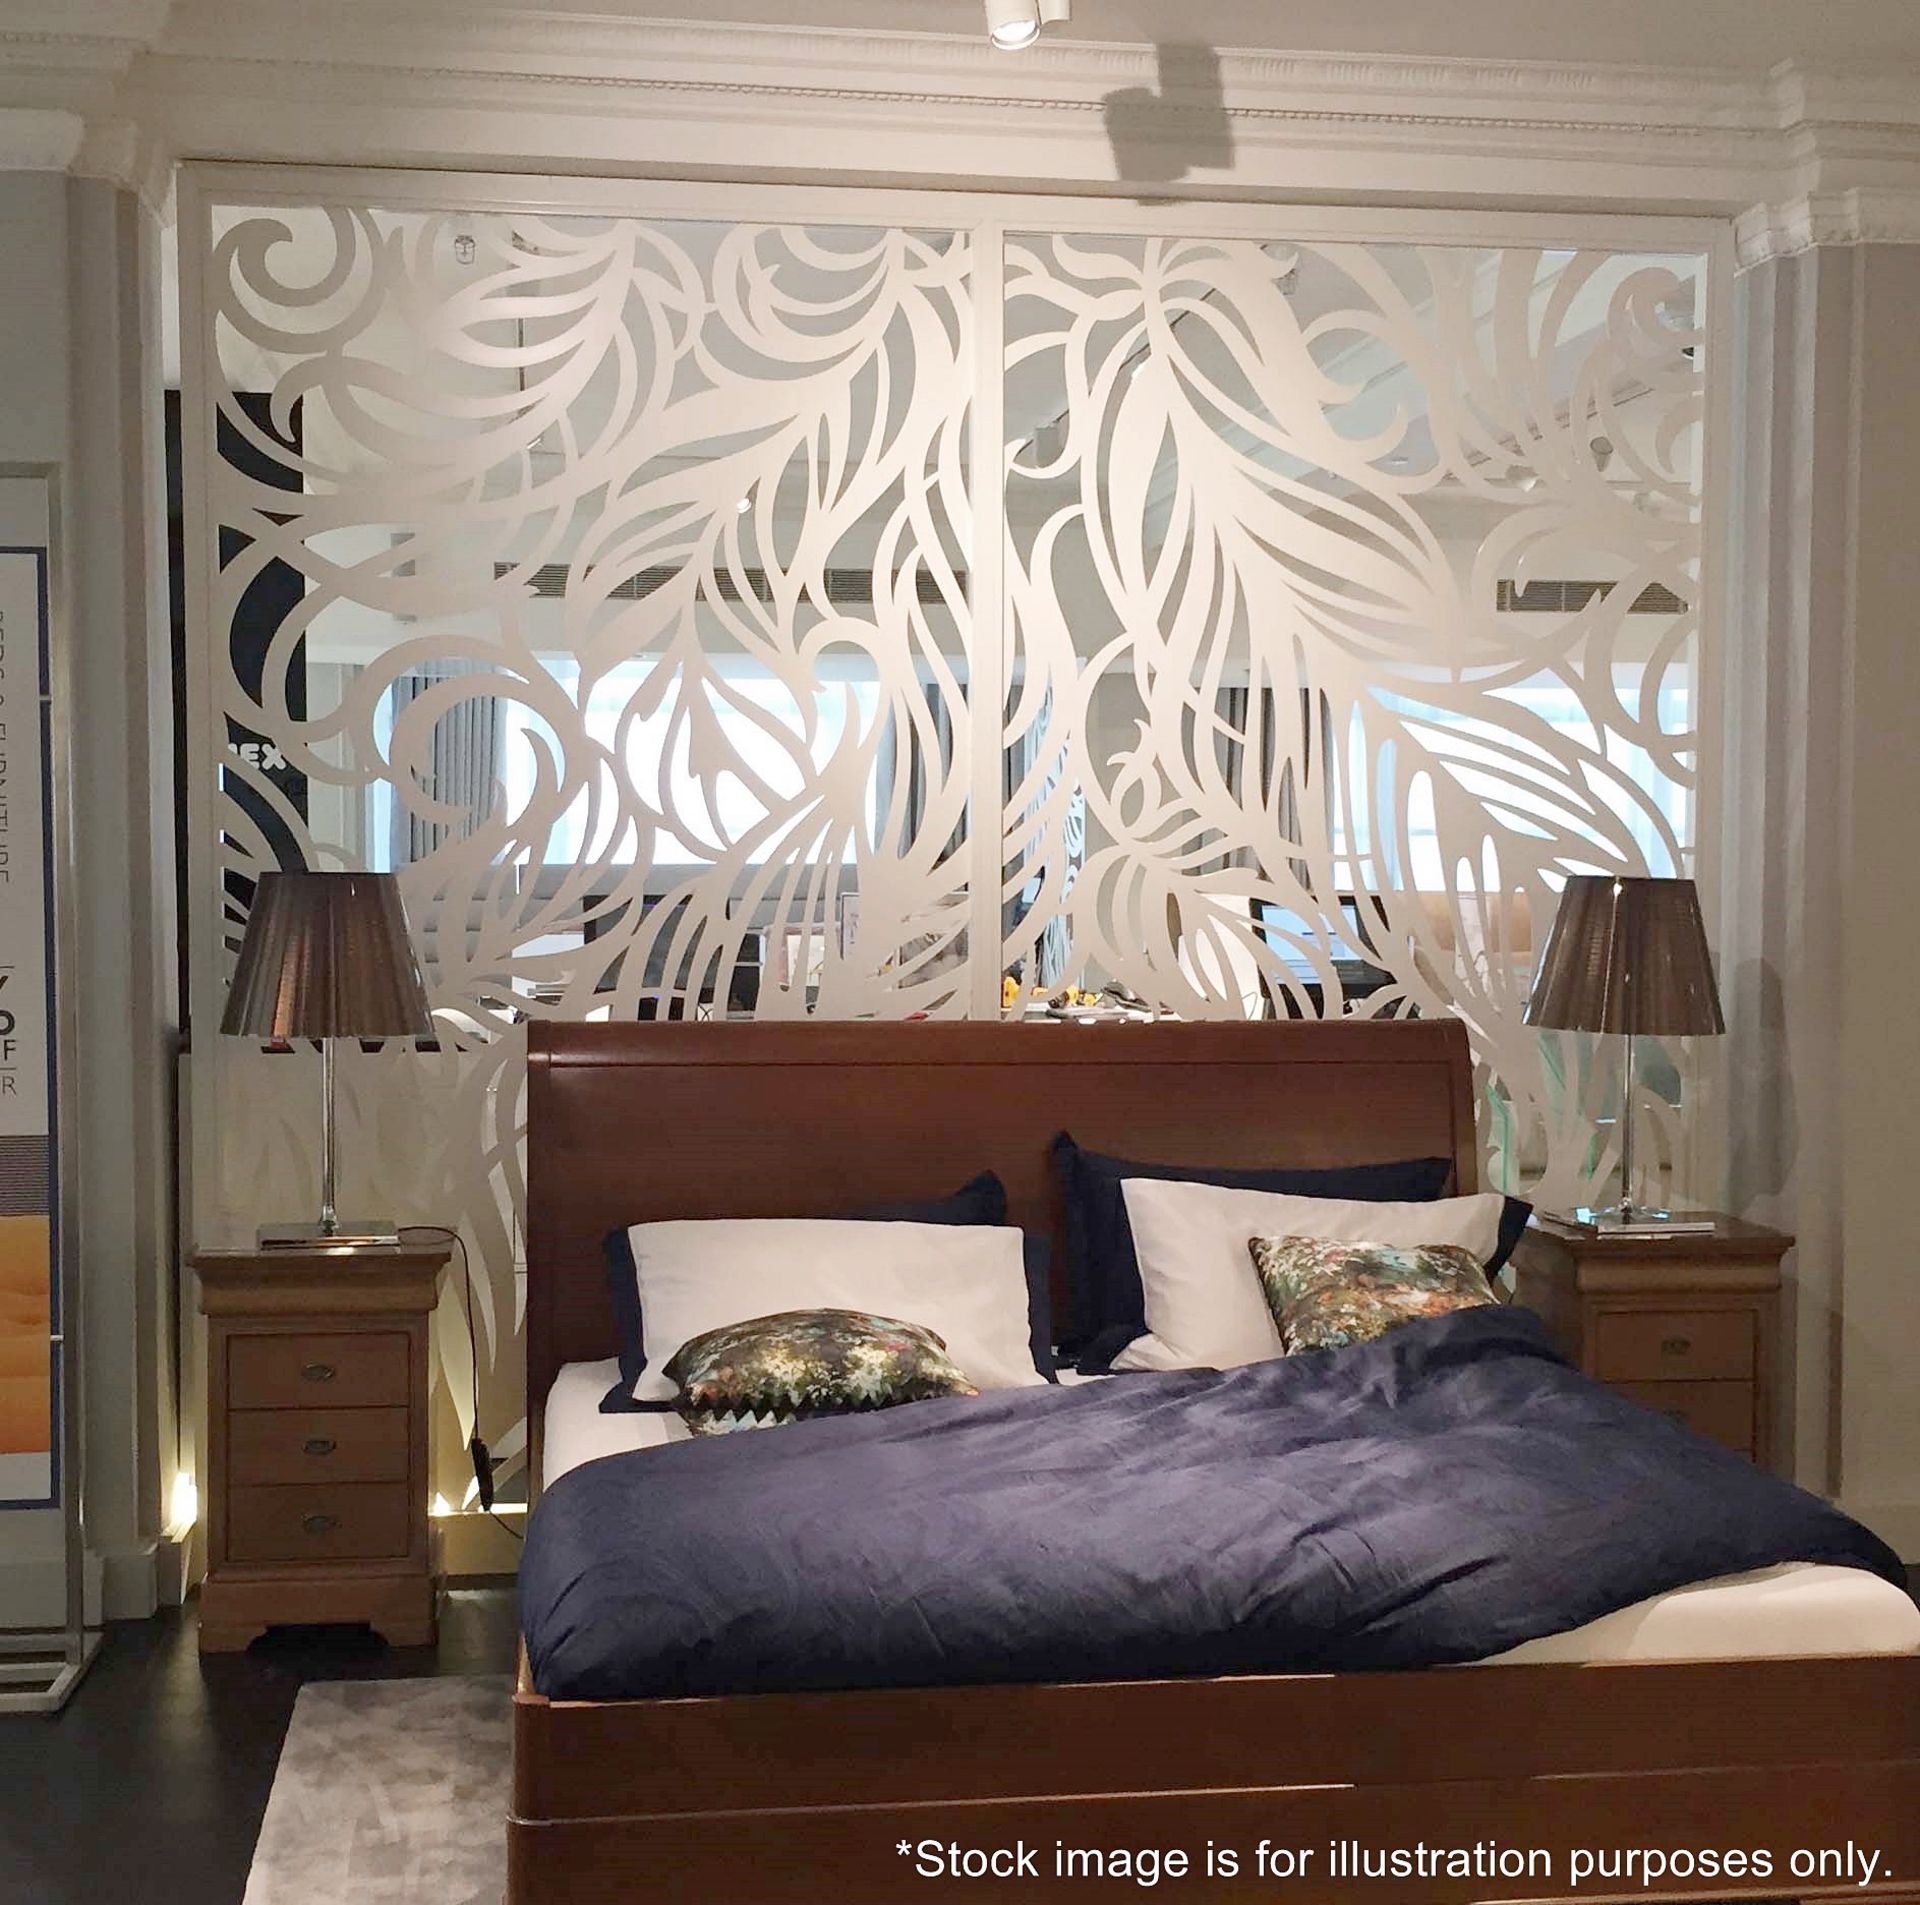 A Pair Of Elegant 'Miles and Lincoln' Laser Cut Metal Room Divider Panels In A Feather Design